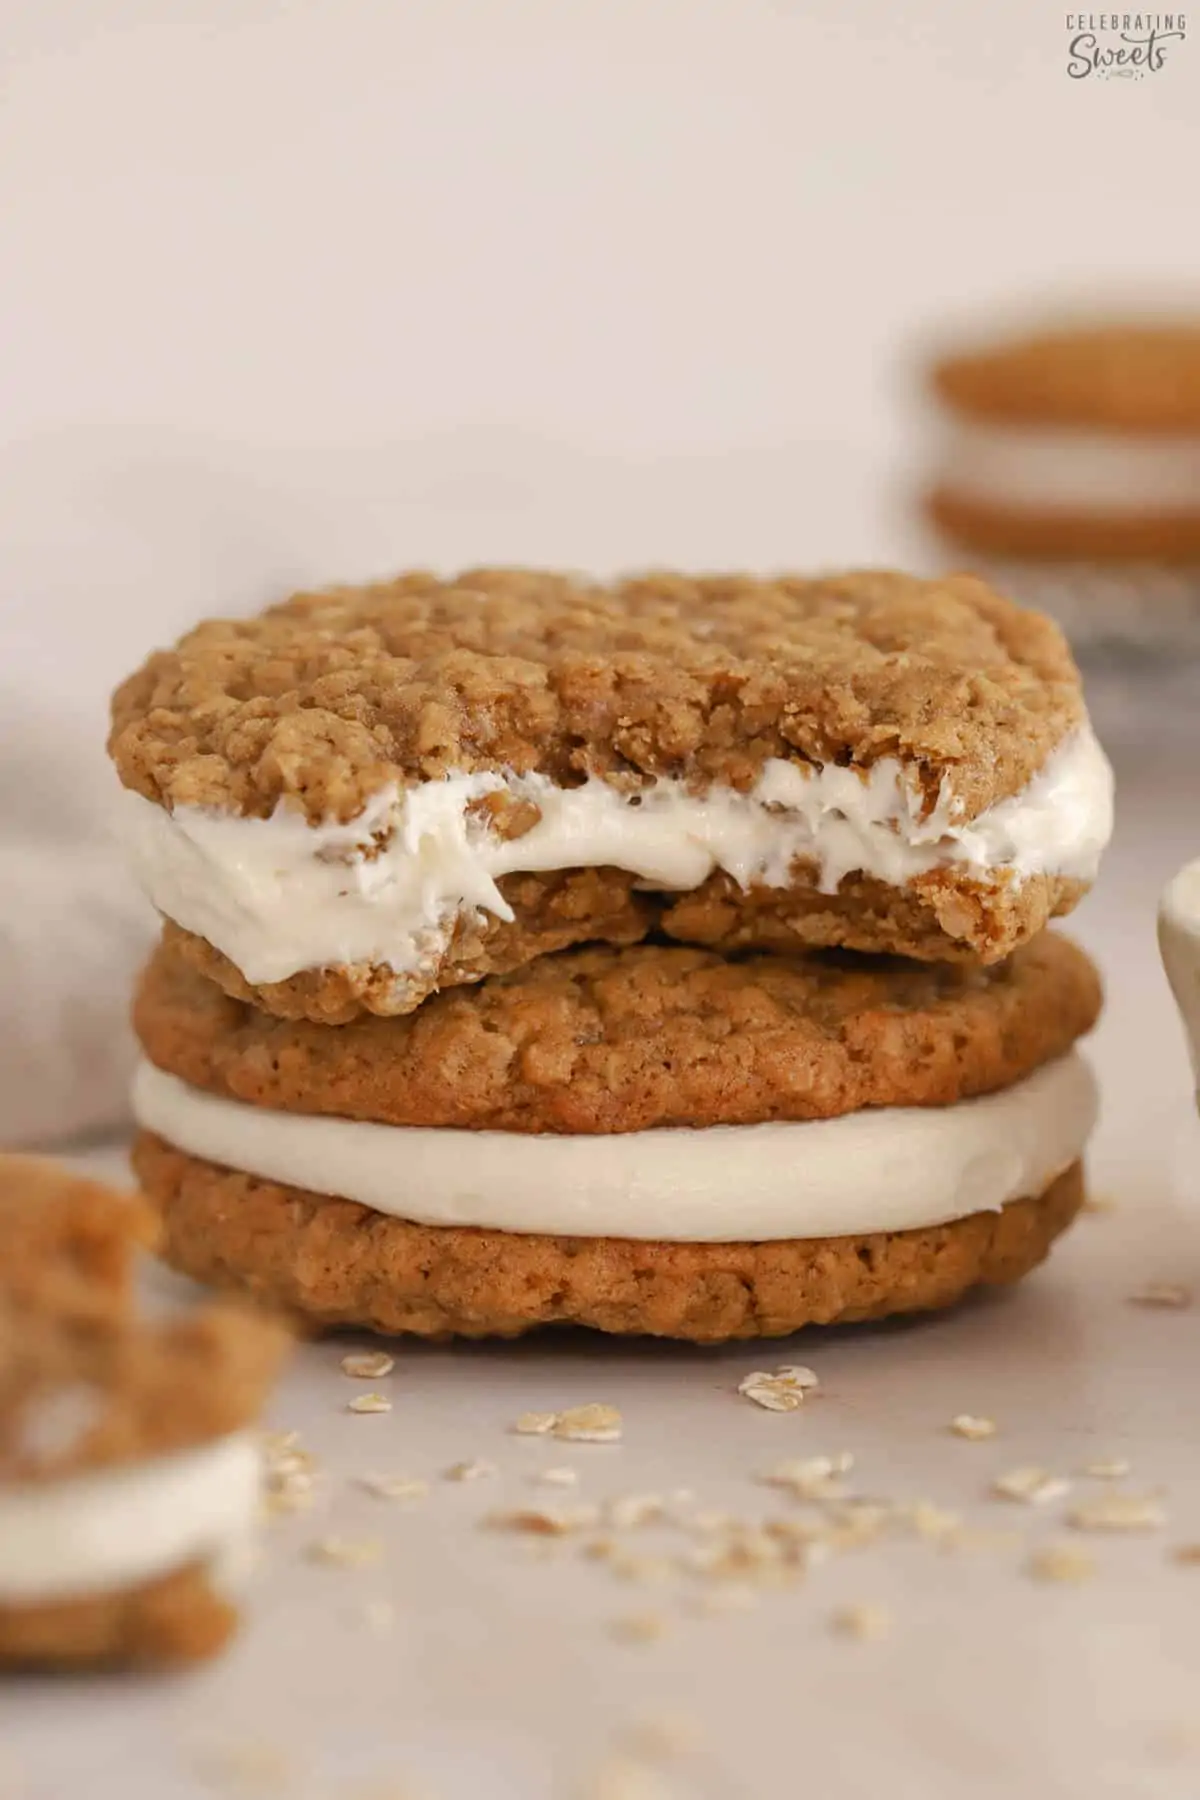 Stack of two oatmeal cream pies with a bite taken out of the top one.